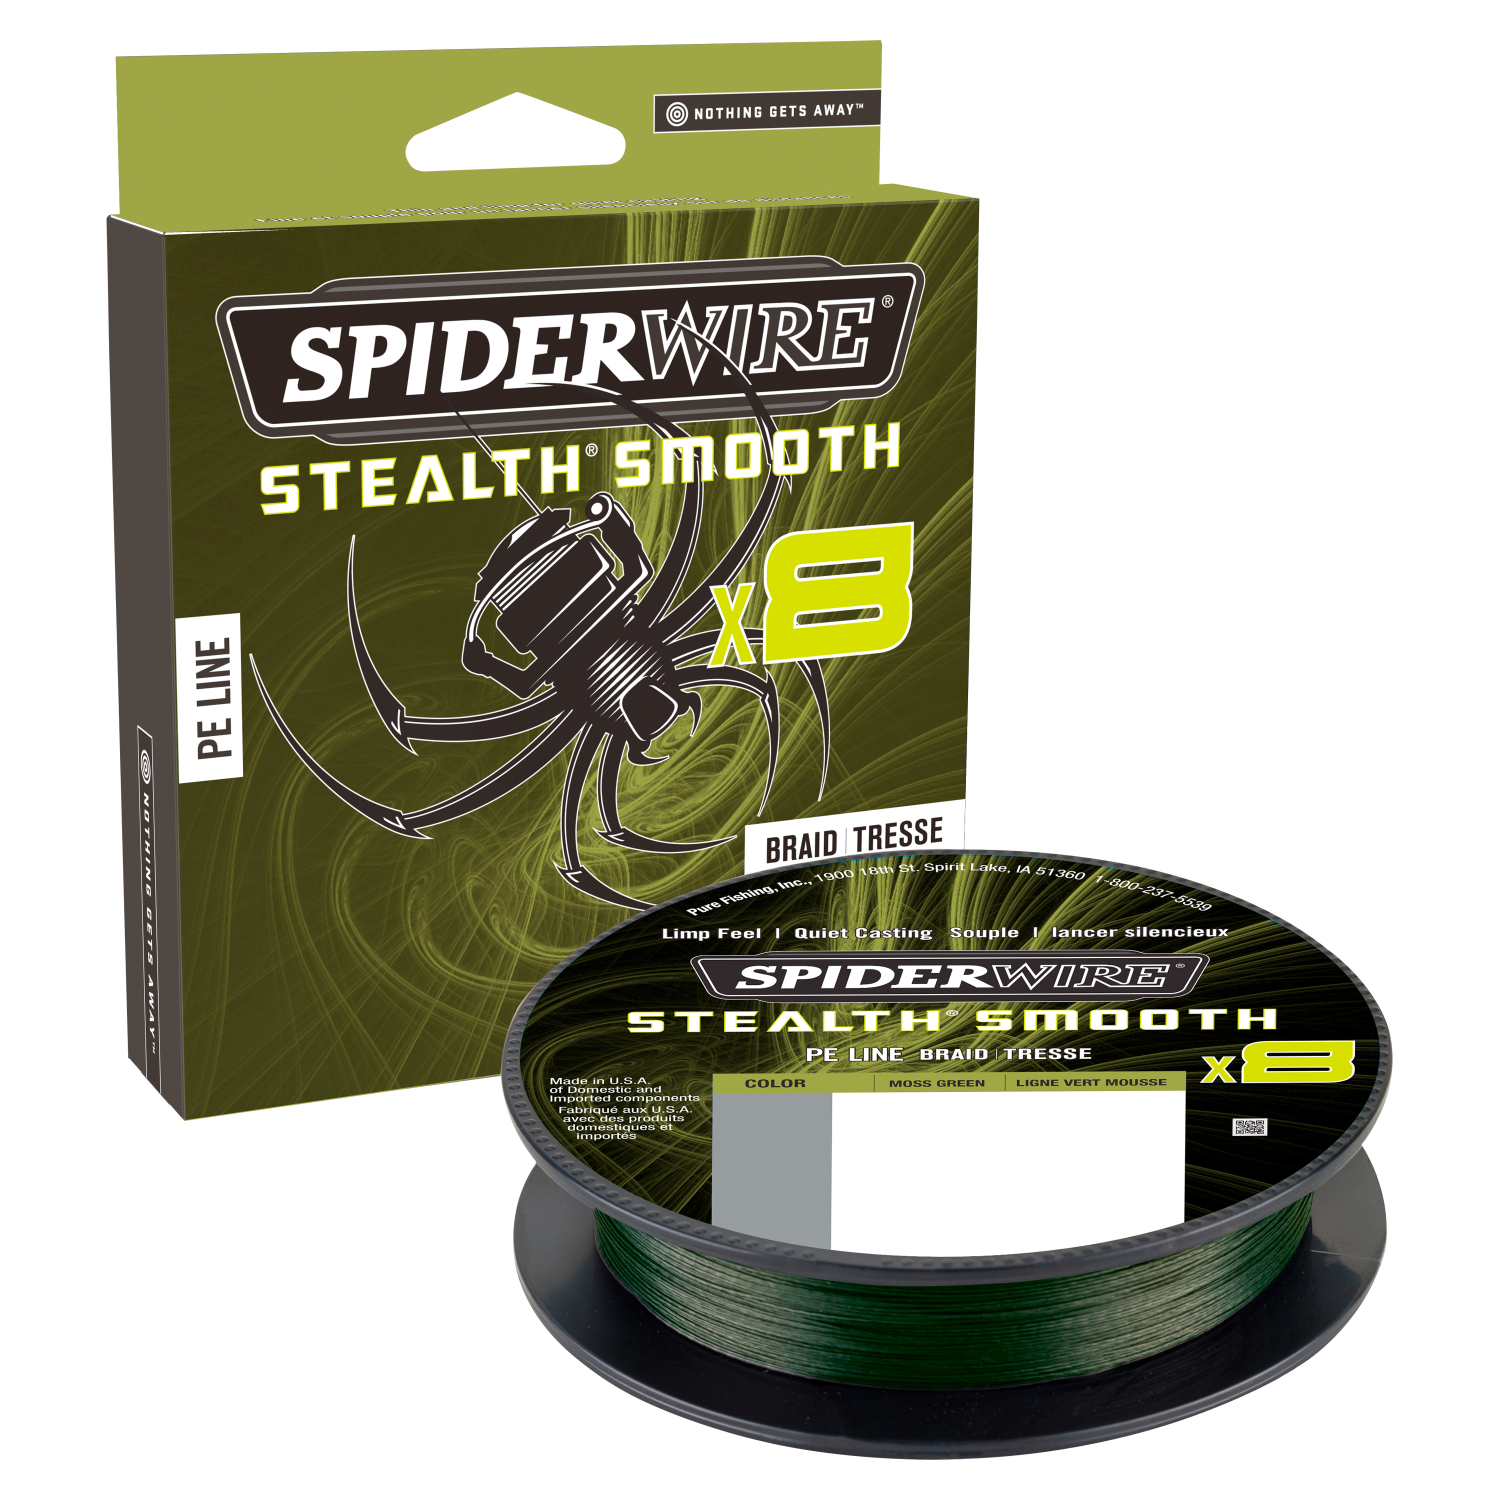 https://images.askari-sport.com/en/product/1/large/spiderwire-fishing-line-stealth-smooth-8-moss-green-150-m-1704287106.jpg